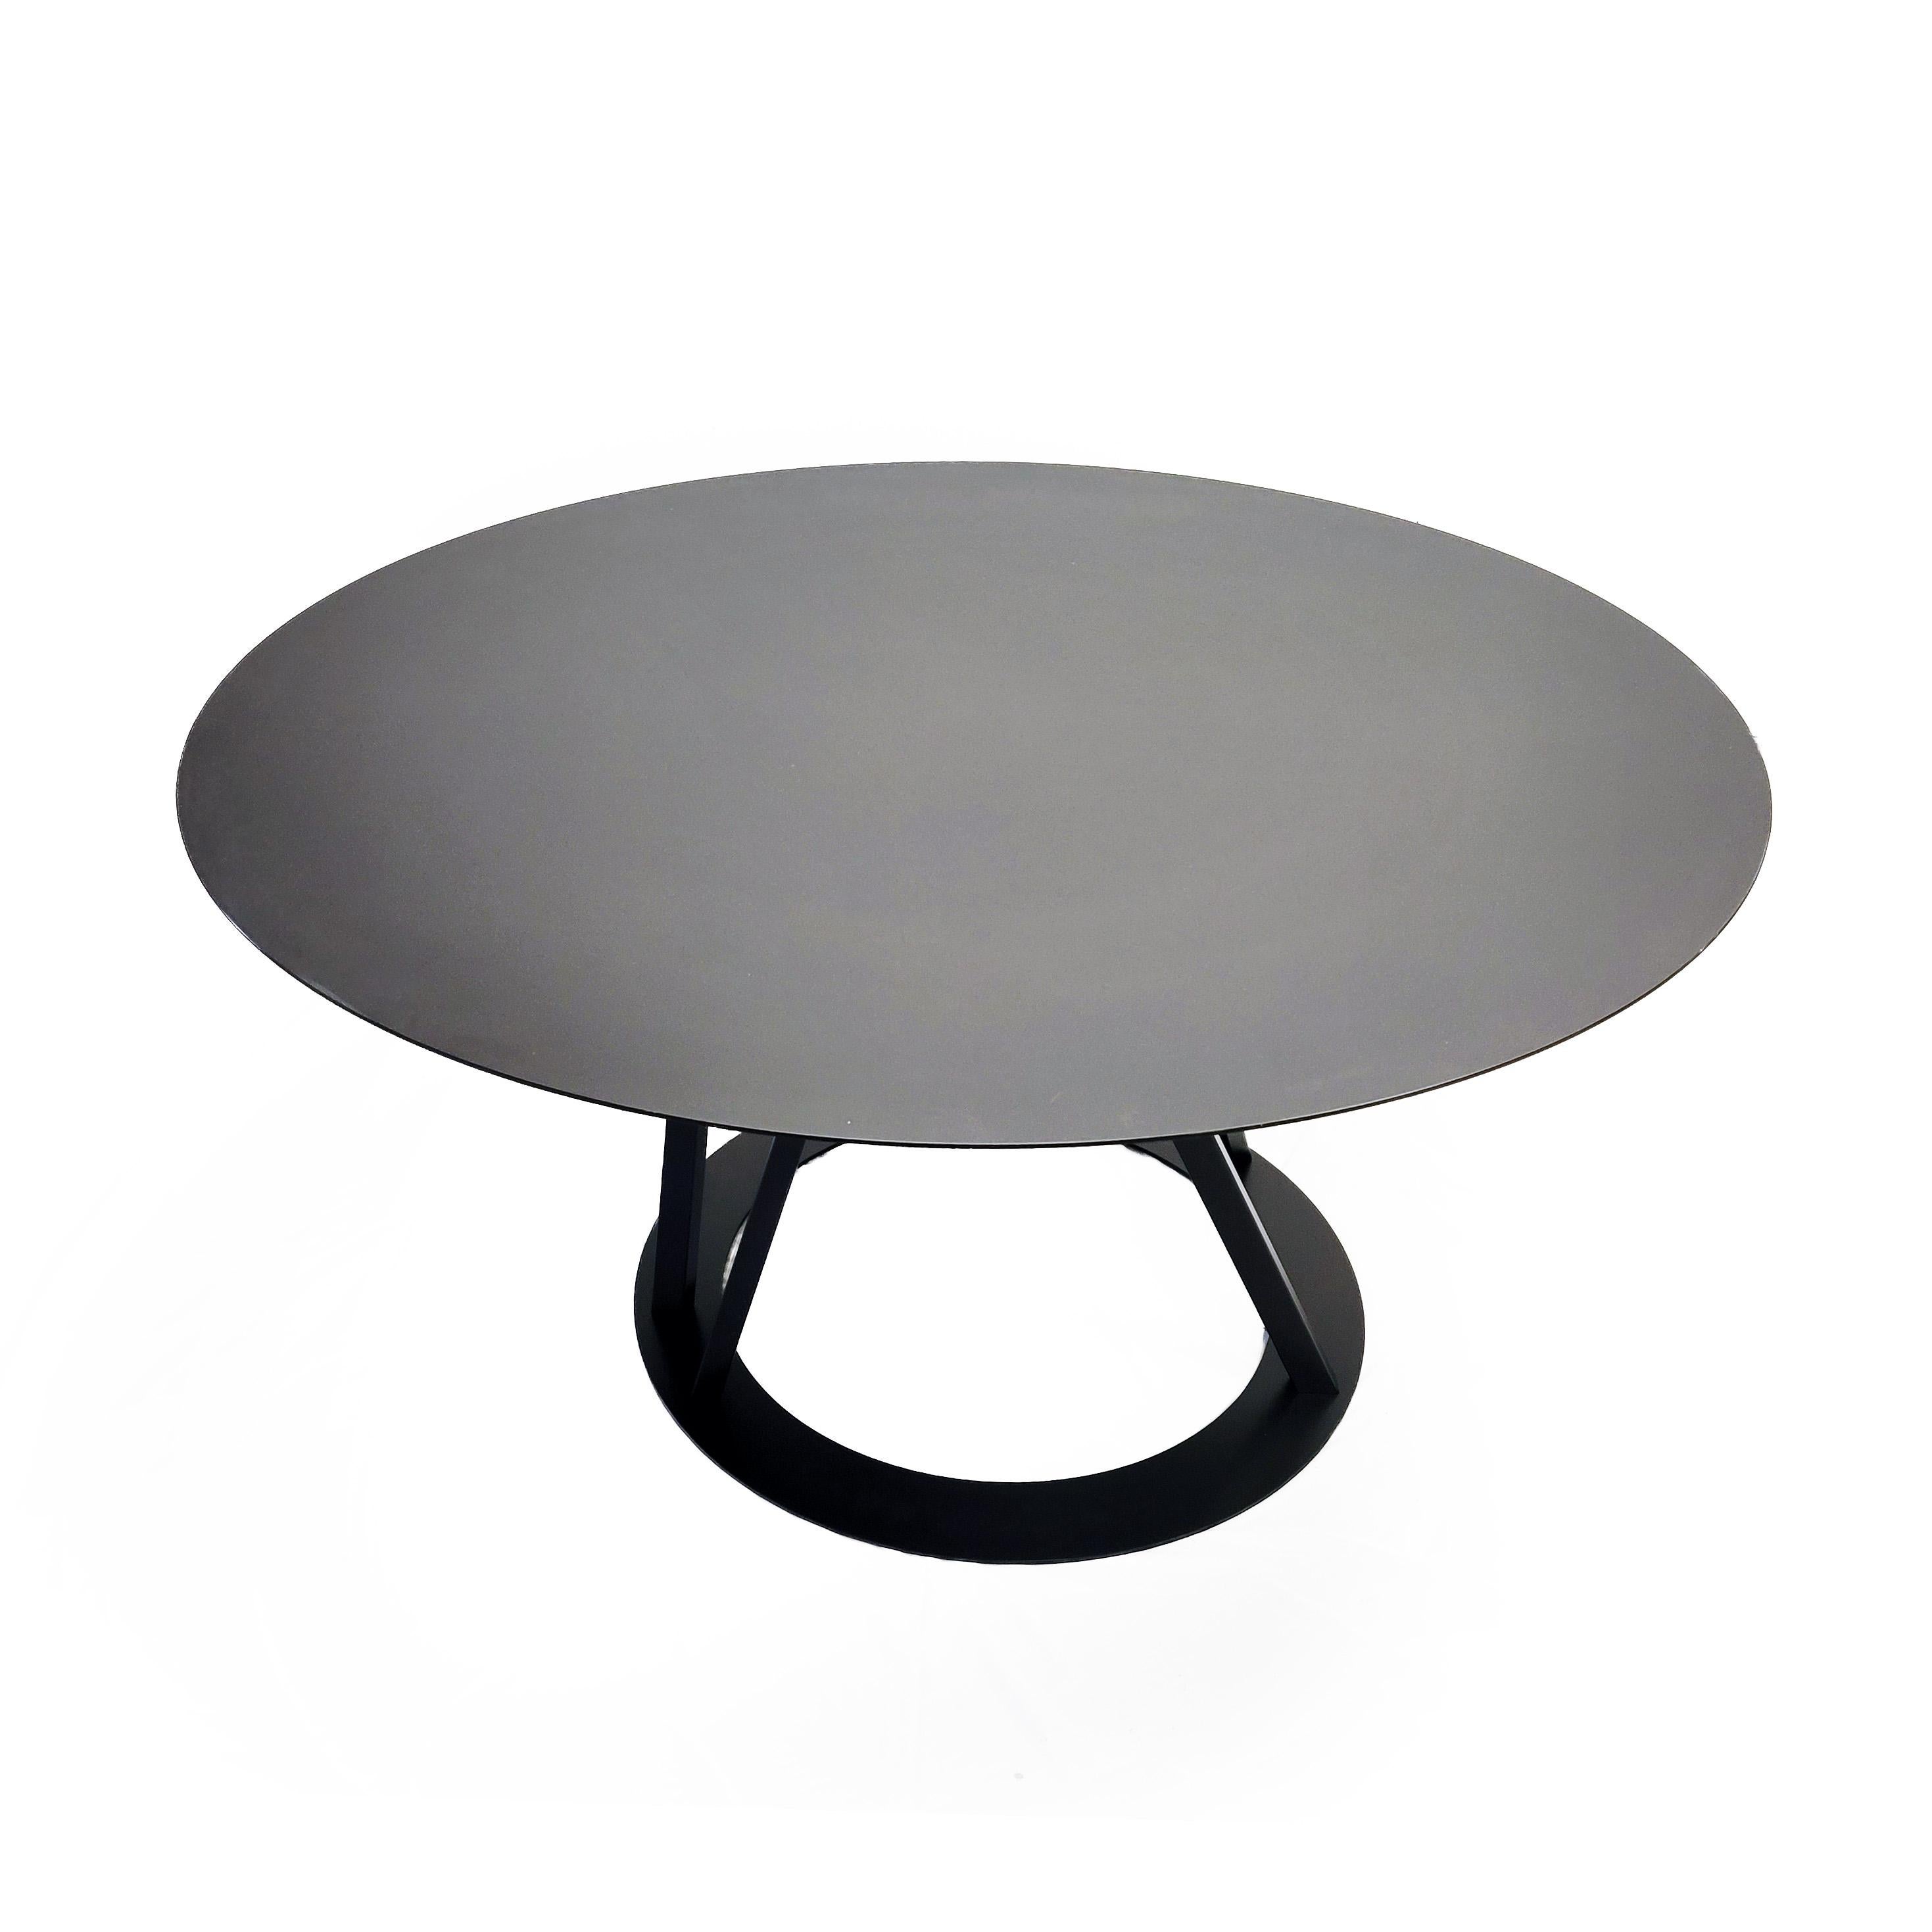 Italian Round Big Irony Dining Table by Maurizio Peregalli for Zeus For Sale